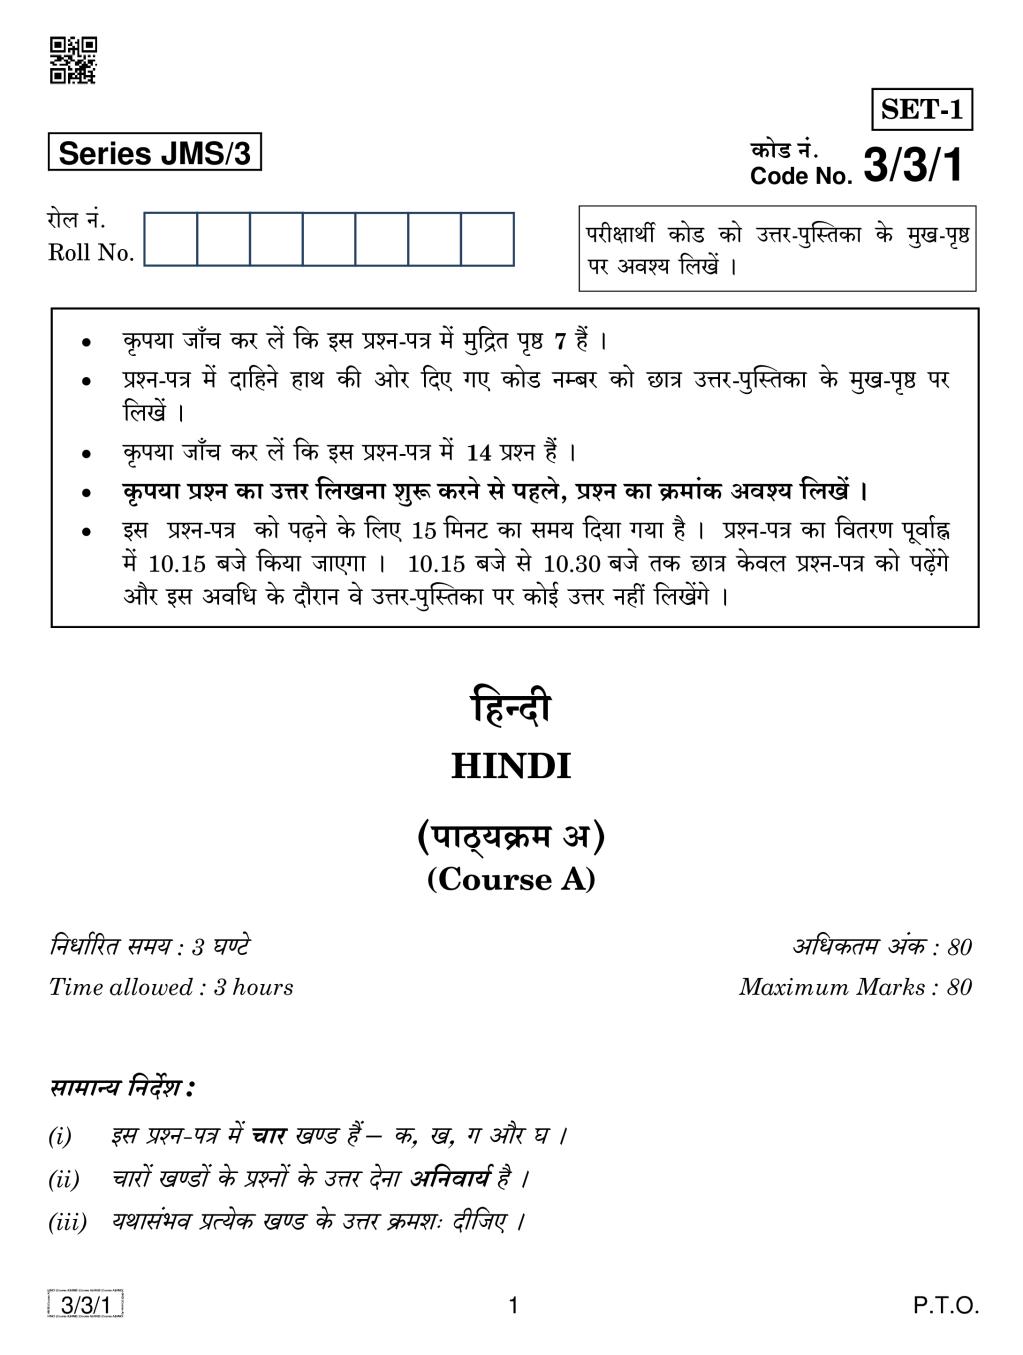 CBSE Class 10 Hindi Course A Question Paper 2019 Set 3 - Page 1